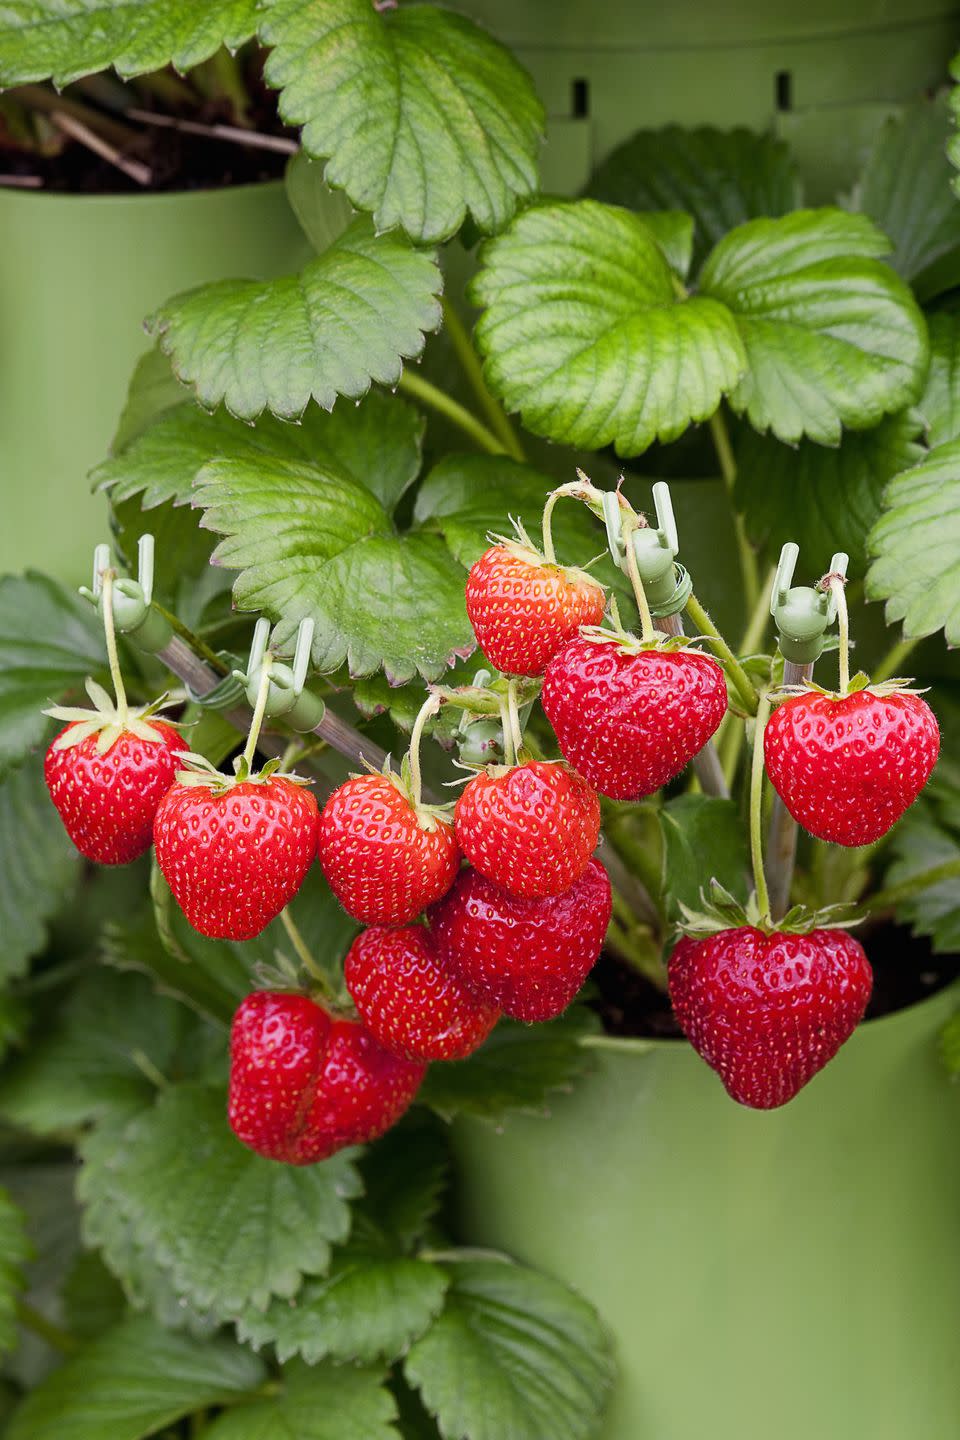 patio plants, close up of strawberries outdoors